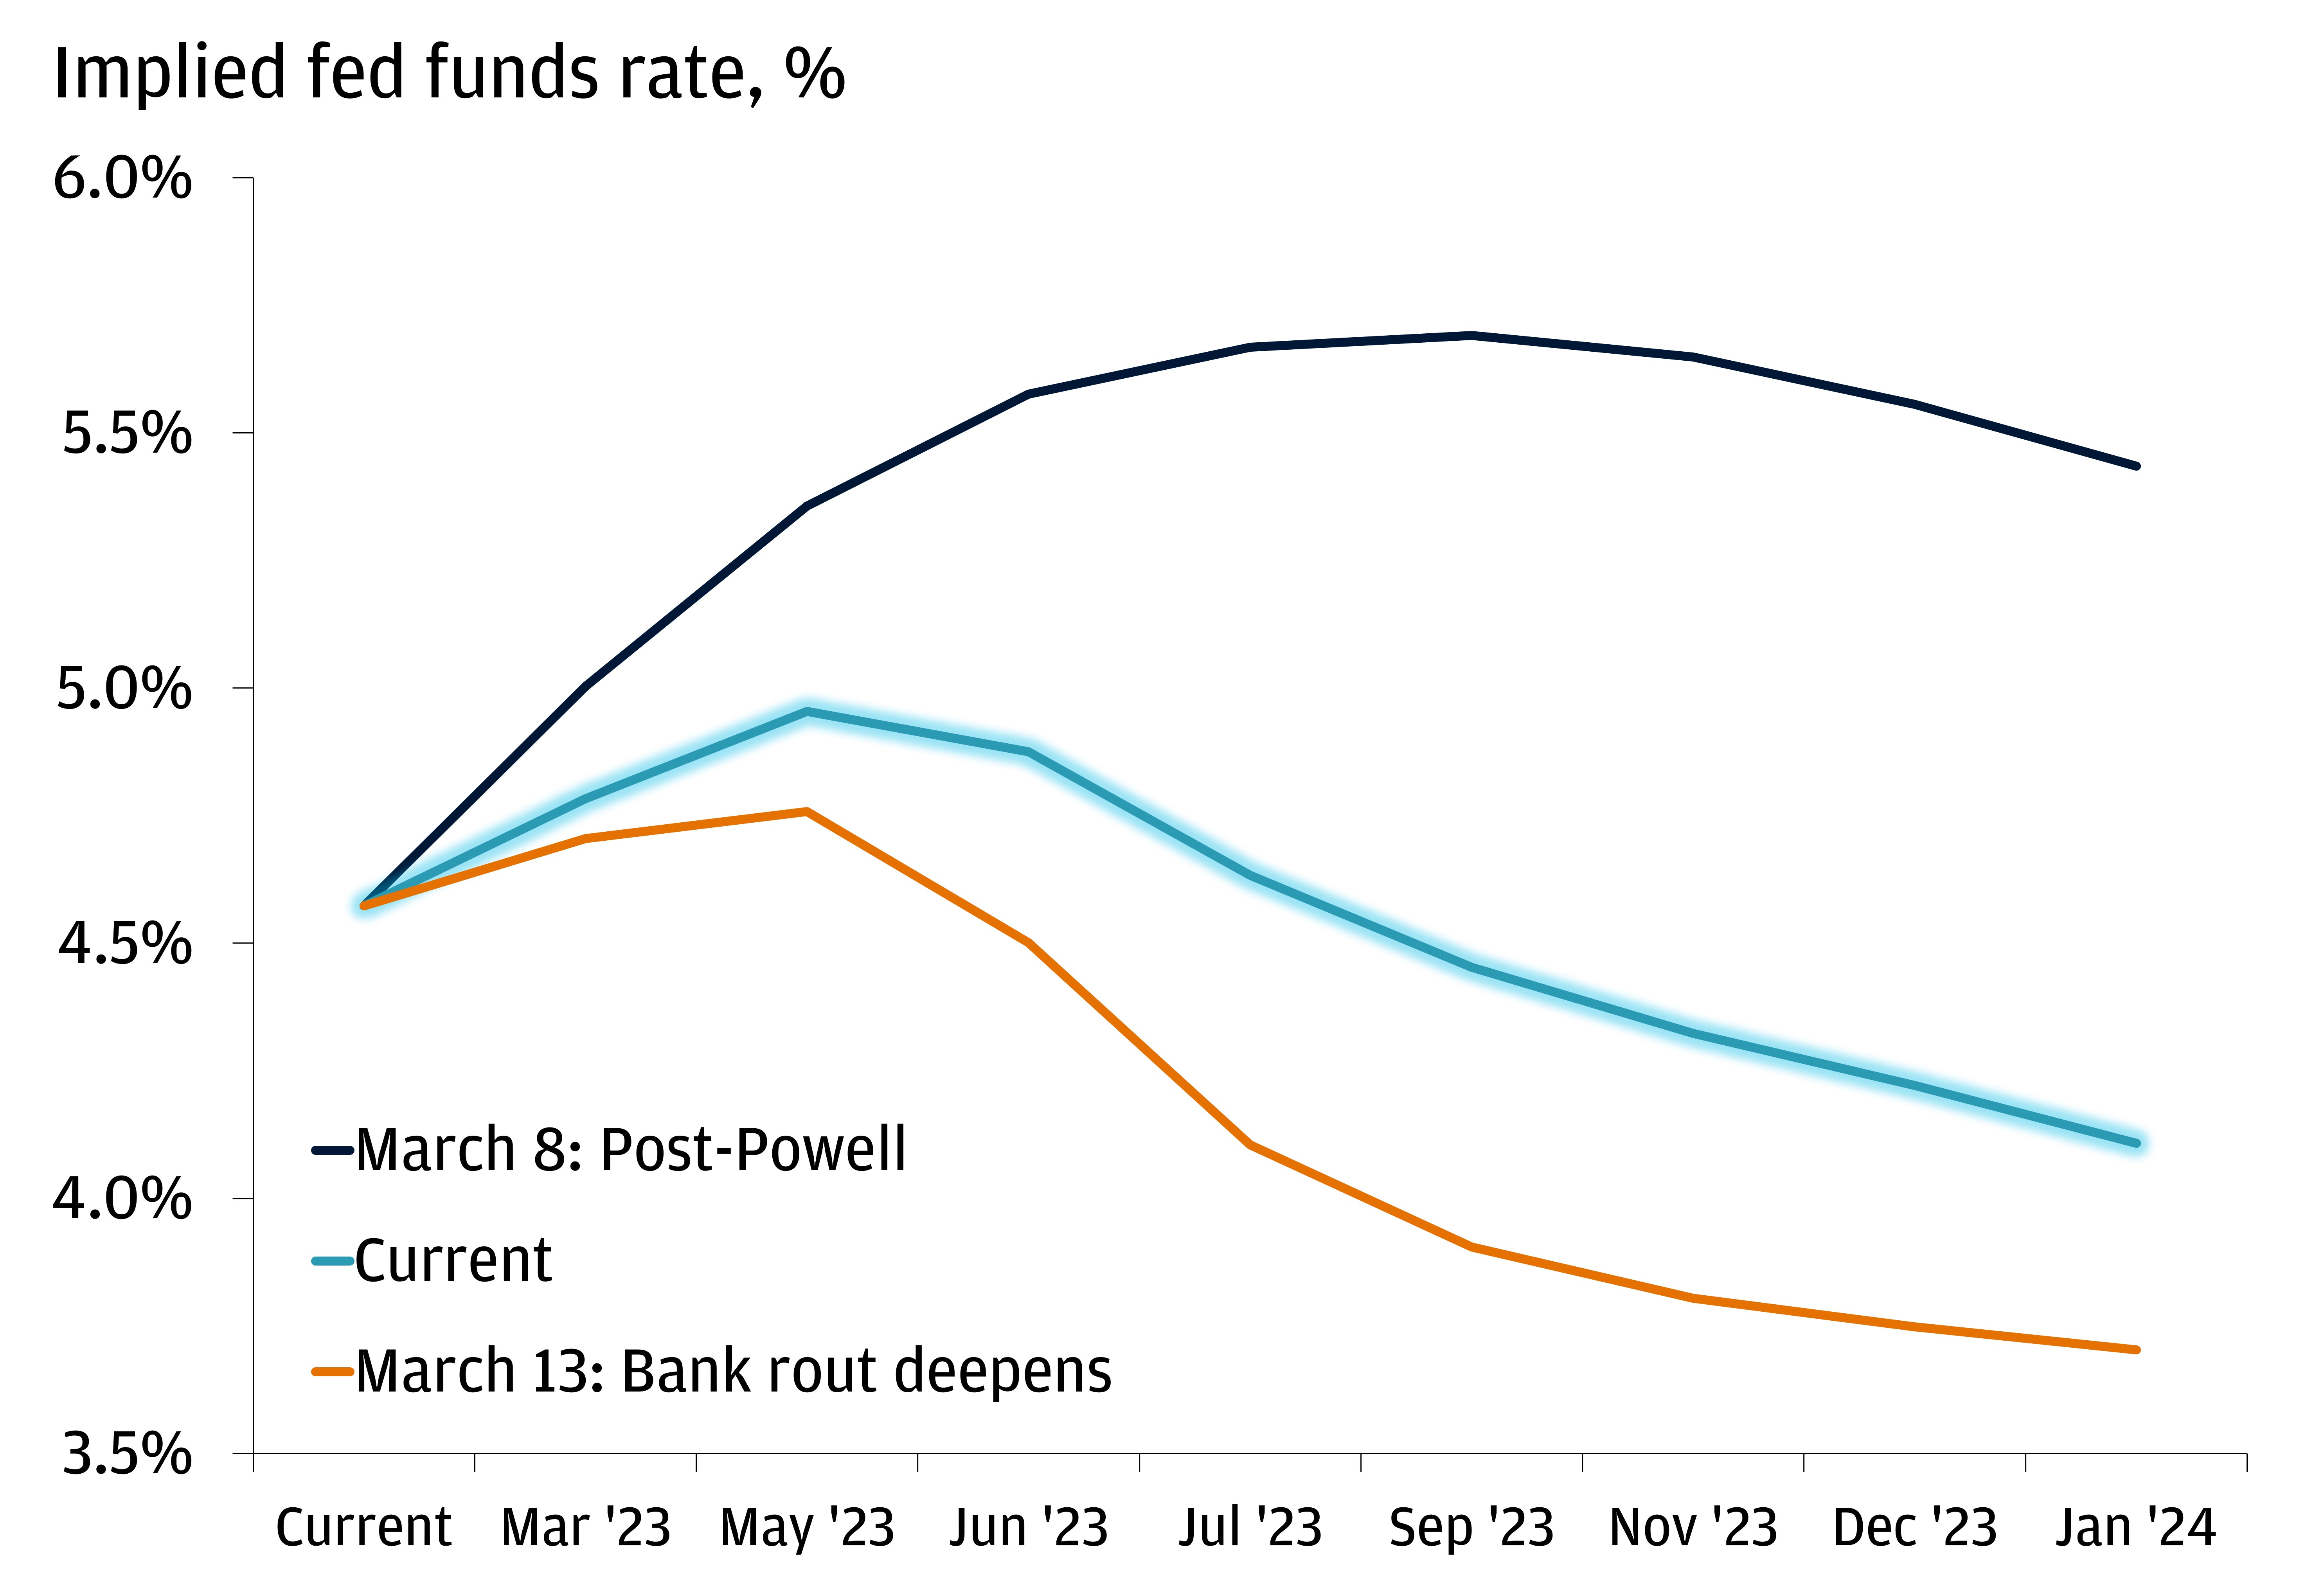 This chart shows the implied fed funds rate on March 8: Post-Powell, the current one (March 17, 2023), and March 13: Bank rout deepens.